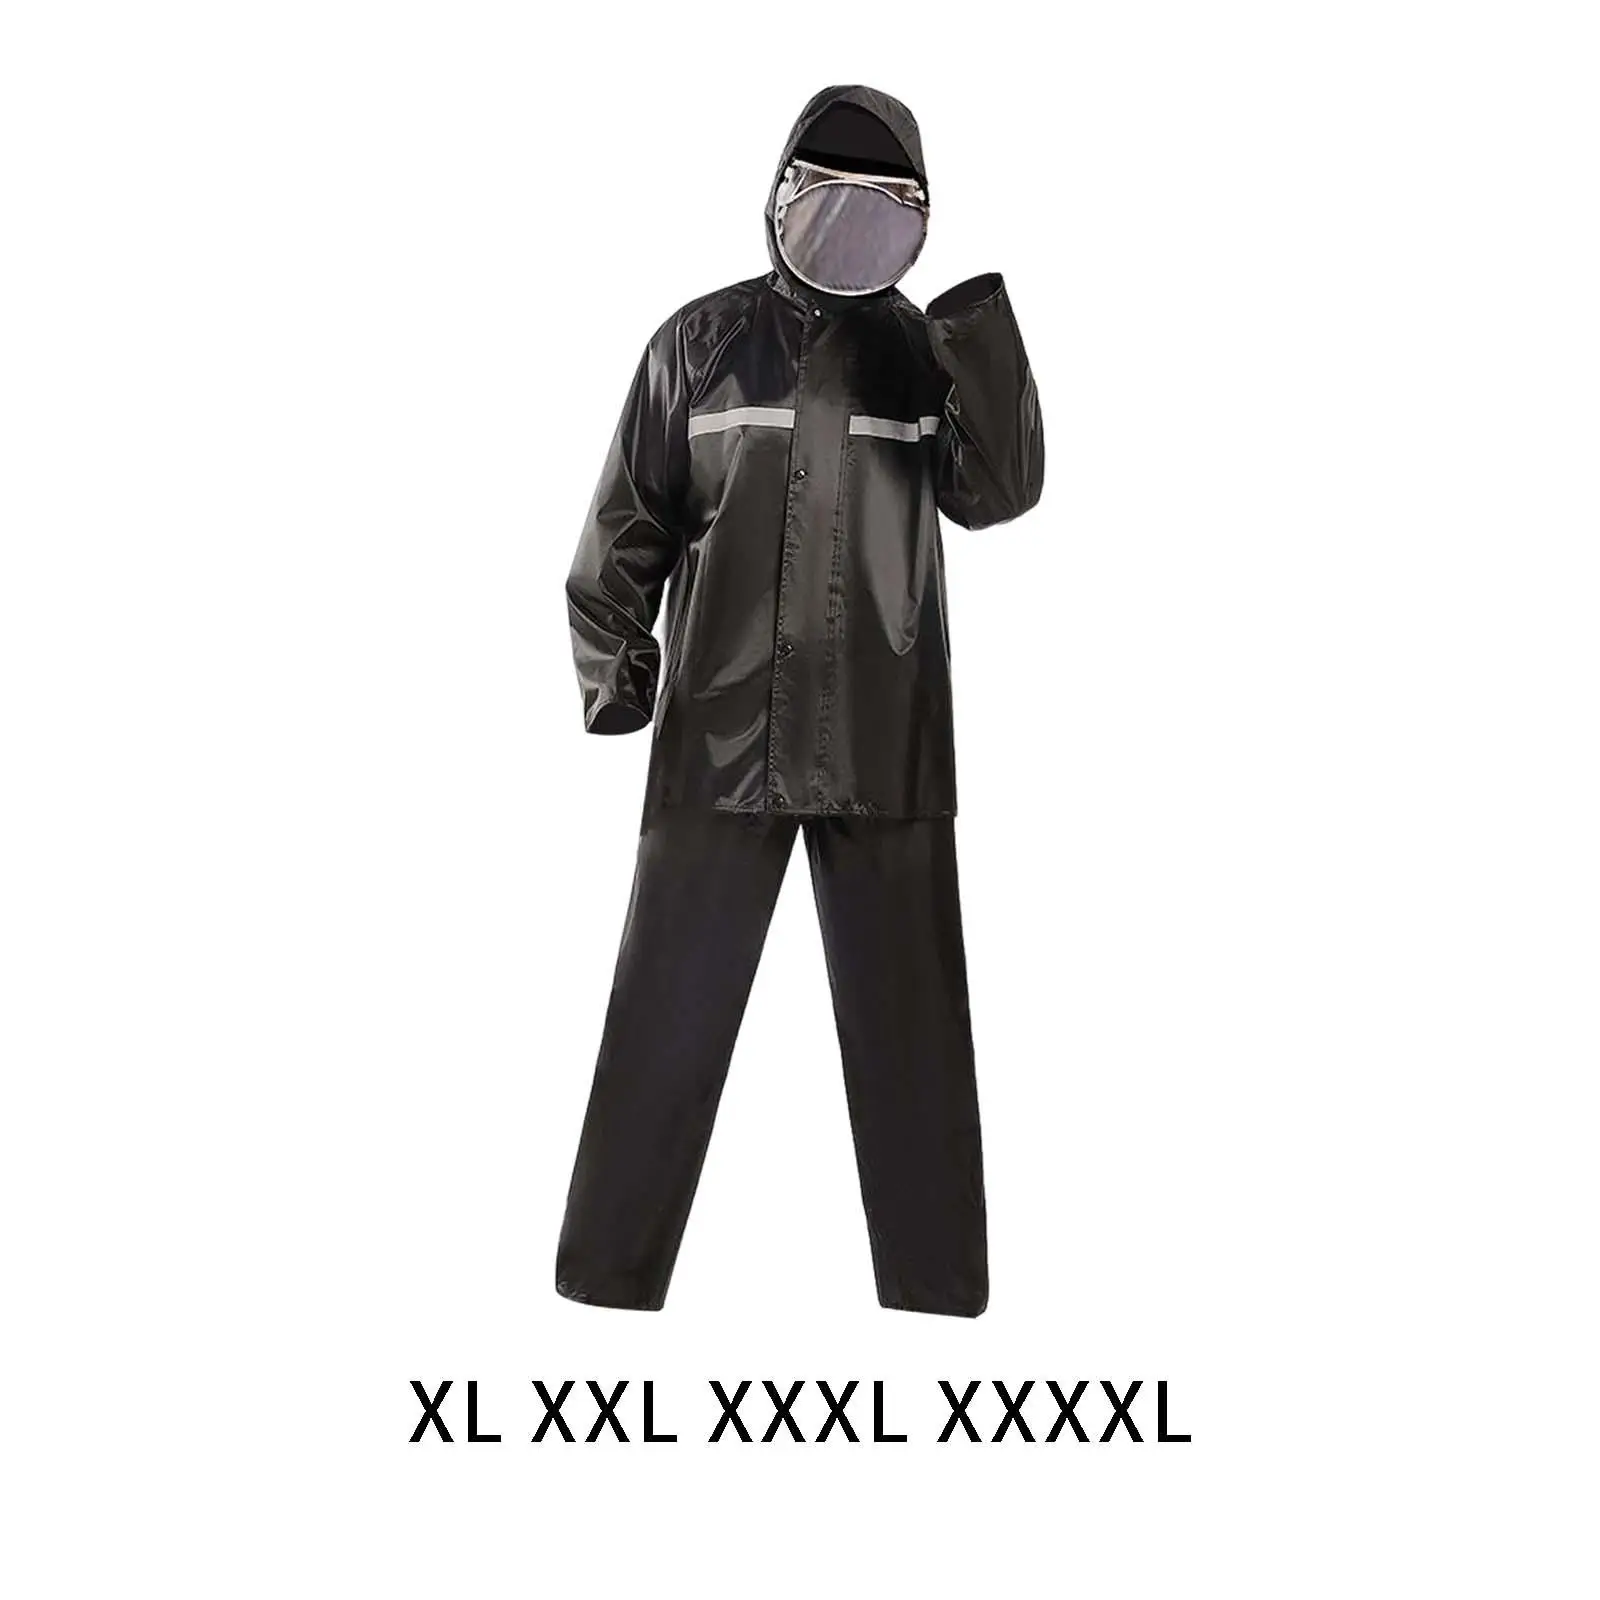 Rain suits for Men Jacket and Pants Waterproof Hooded Coats for Cycling